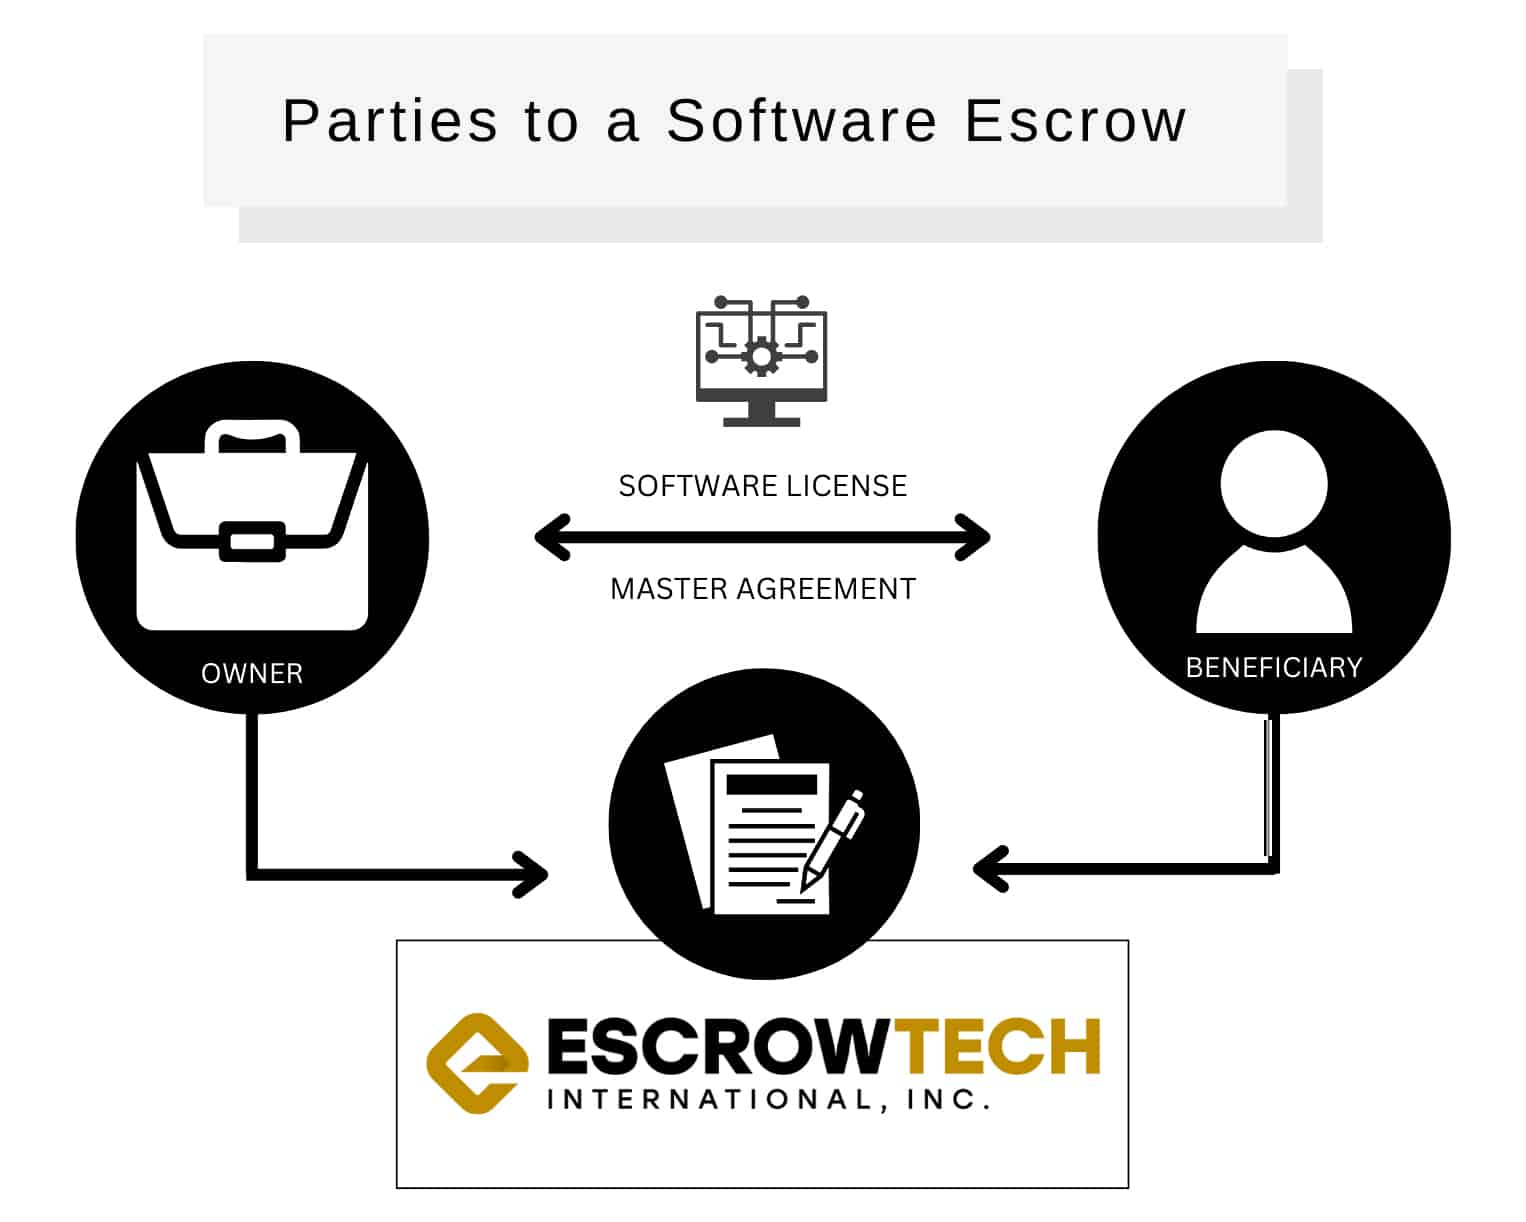 Graphic illustrating the PARTIES TO A SOFTWARE ESCROW. | EscrowTech